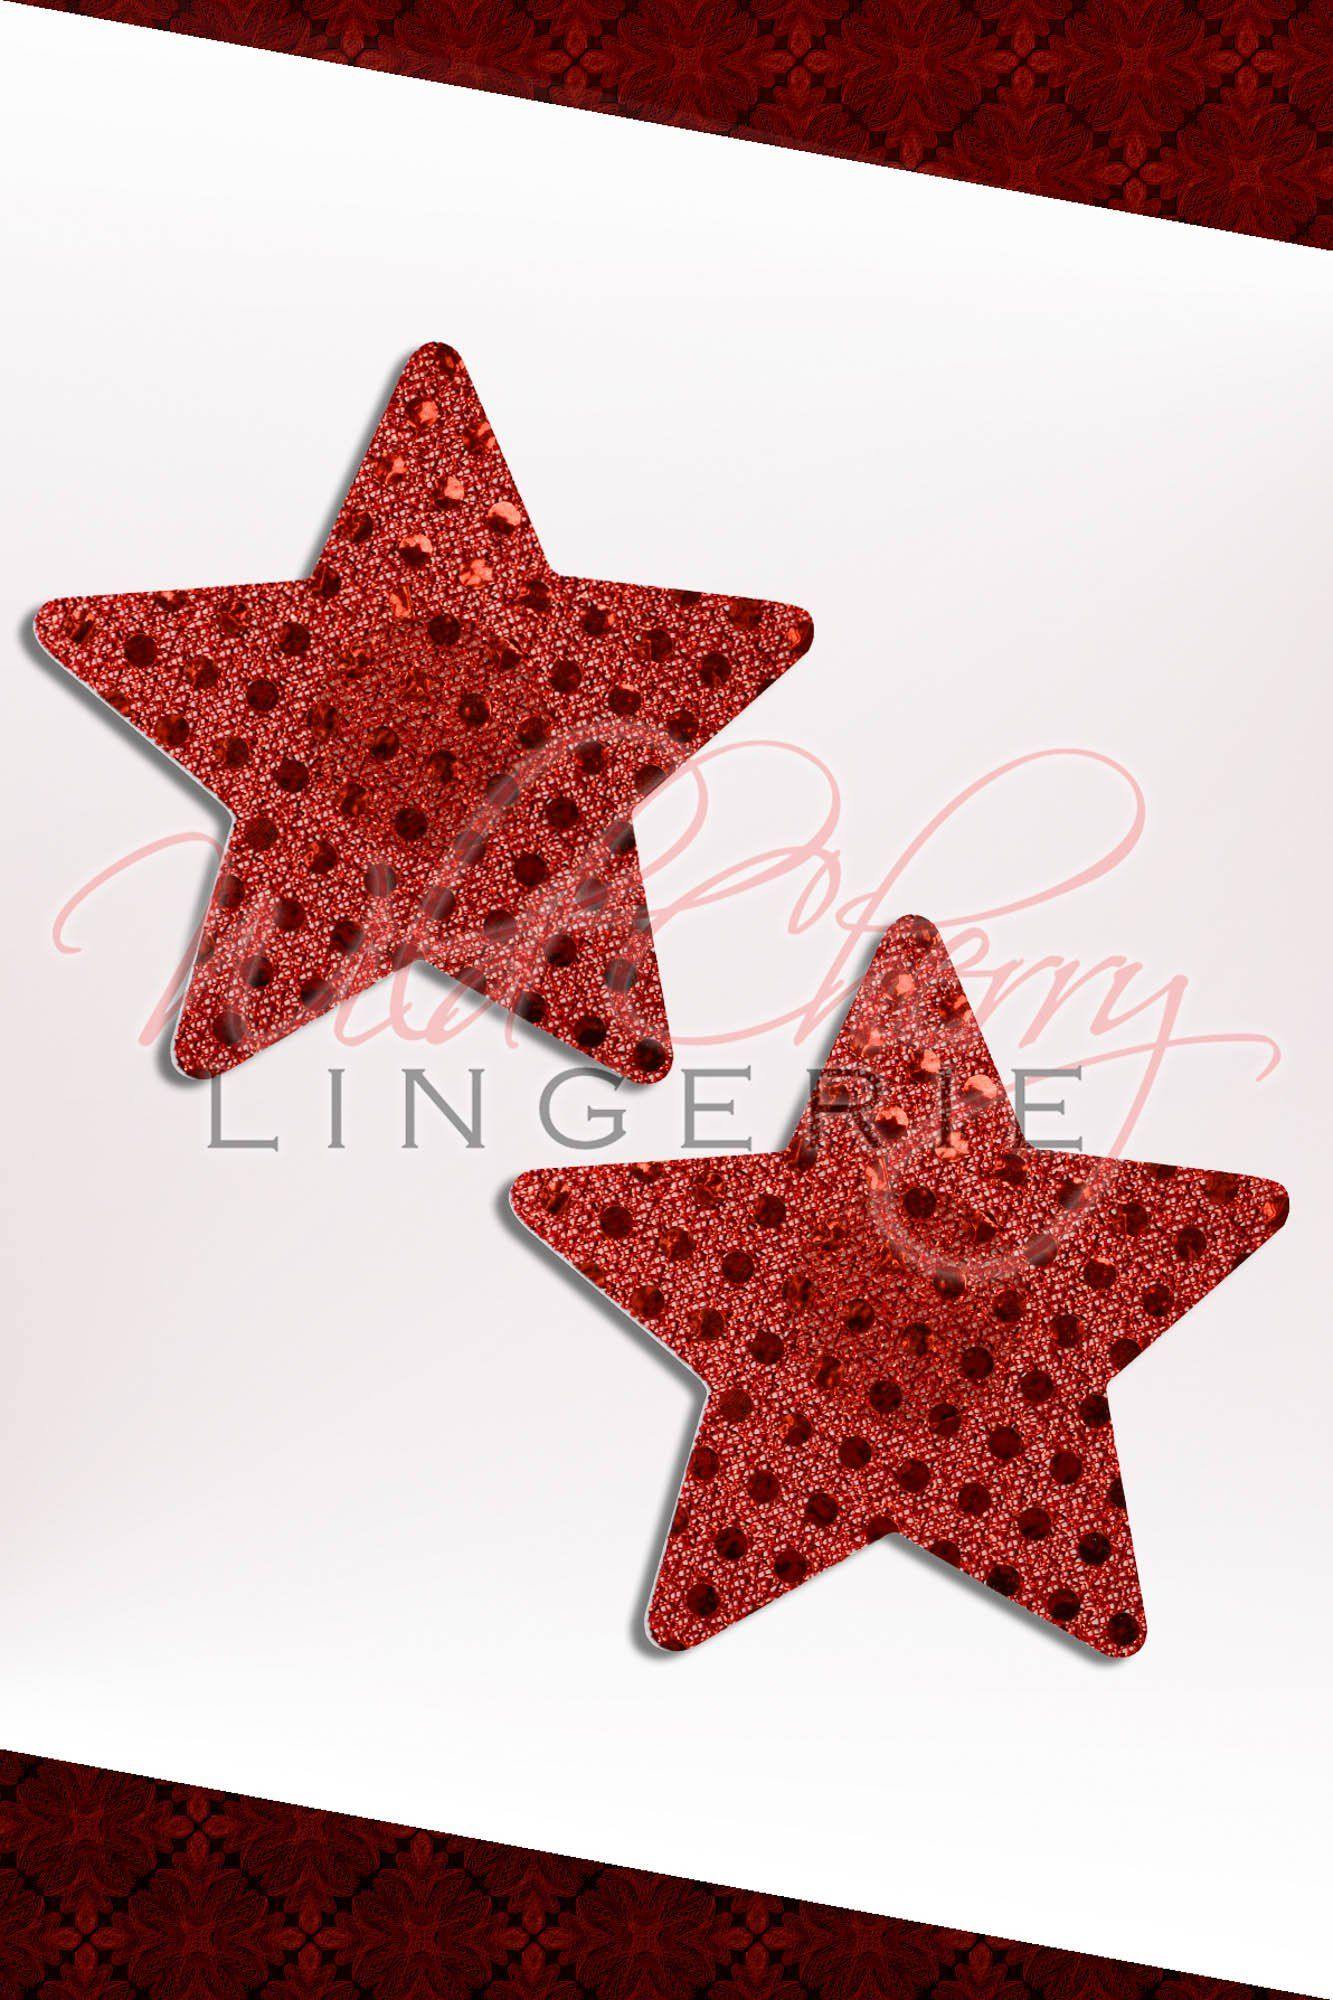 You are a Star Baby Nipple Covers, Accessories, Wild Cherry Lingerie - Wild Cherry Lingerie